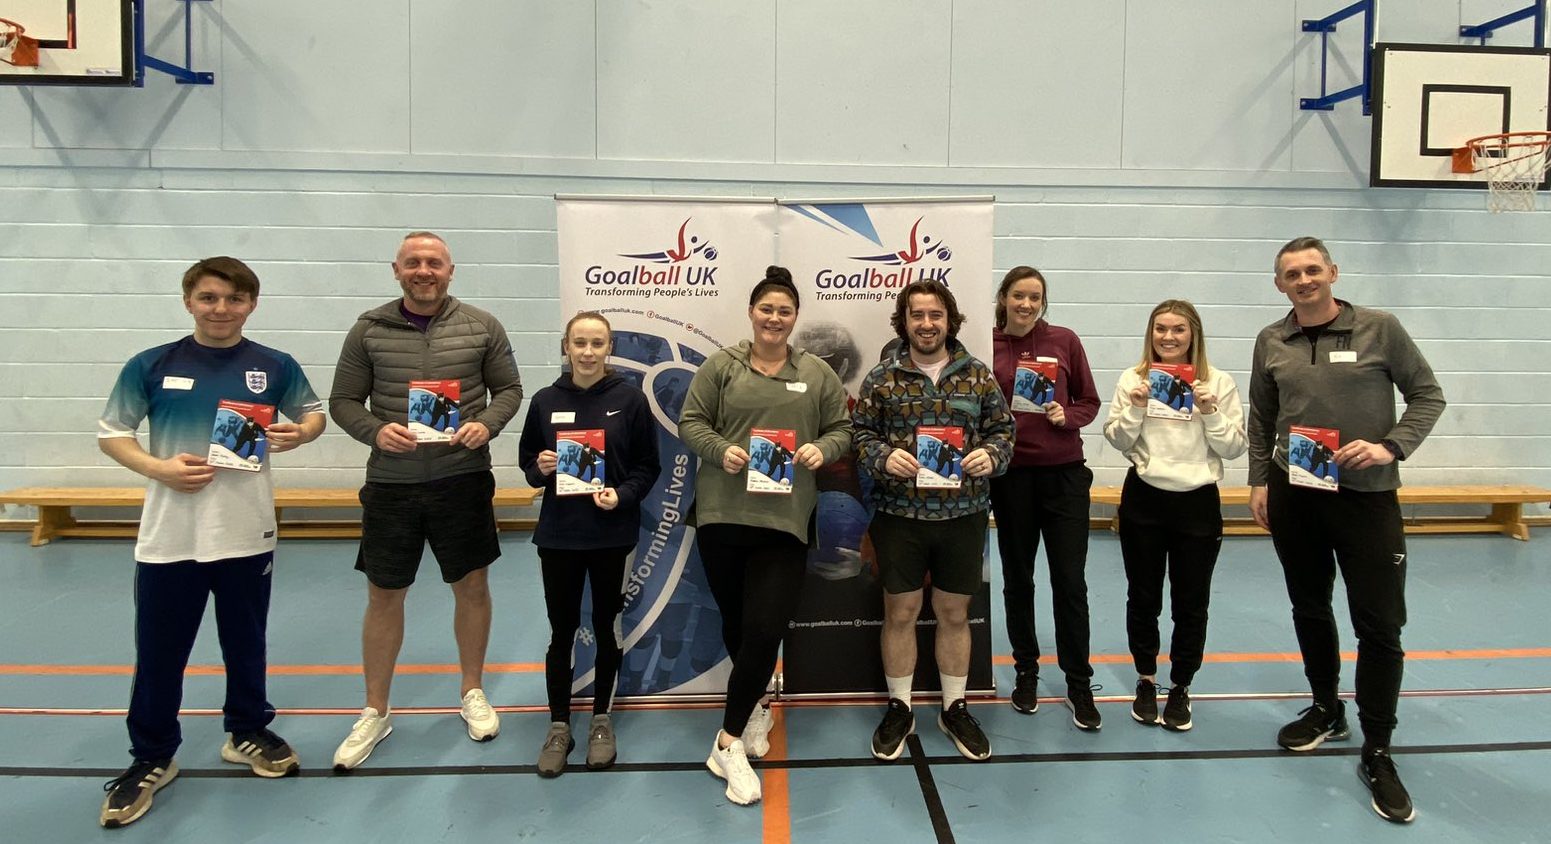 All 8 newly passed candidates on the Goalball School Leaders Course held at The Hive, Birkenhead. All candidates are stood smiling, holding their certificates, in front of two Goalball UK logo banners.